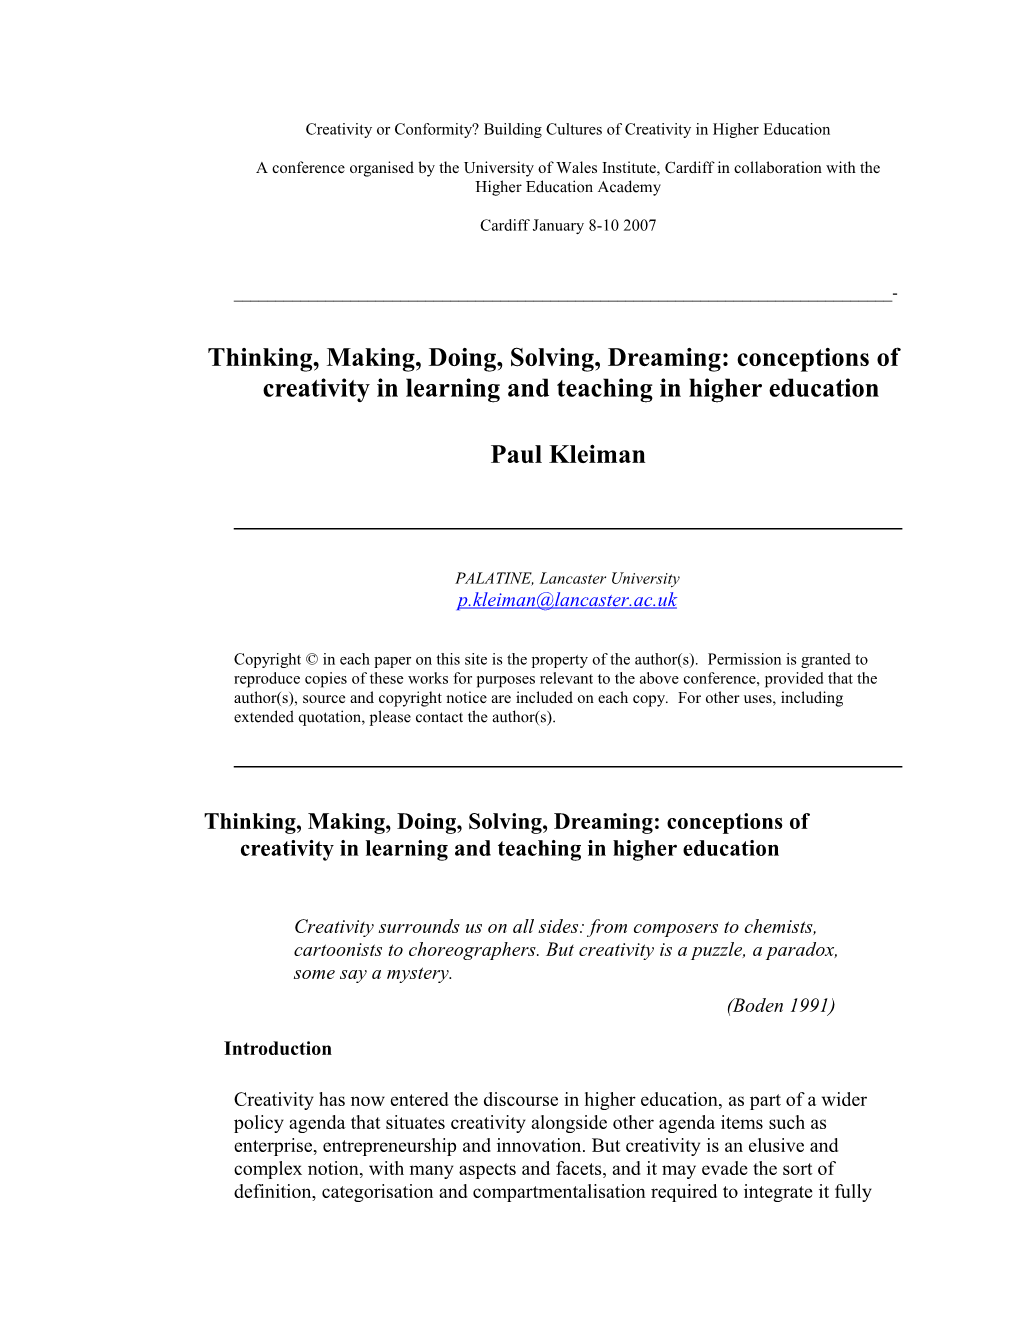 Thinking, Making, Doing, Solving, Dreaming: Conceptions of Creativity in Learning and Teaching